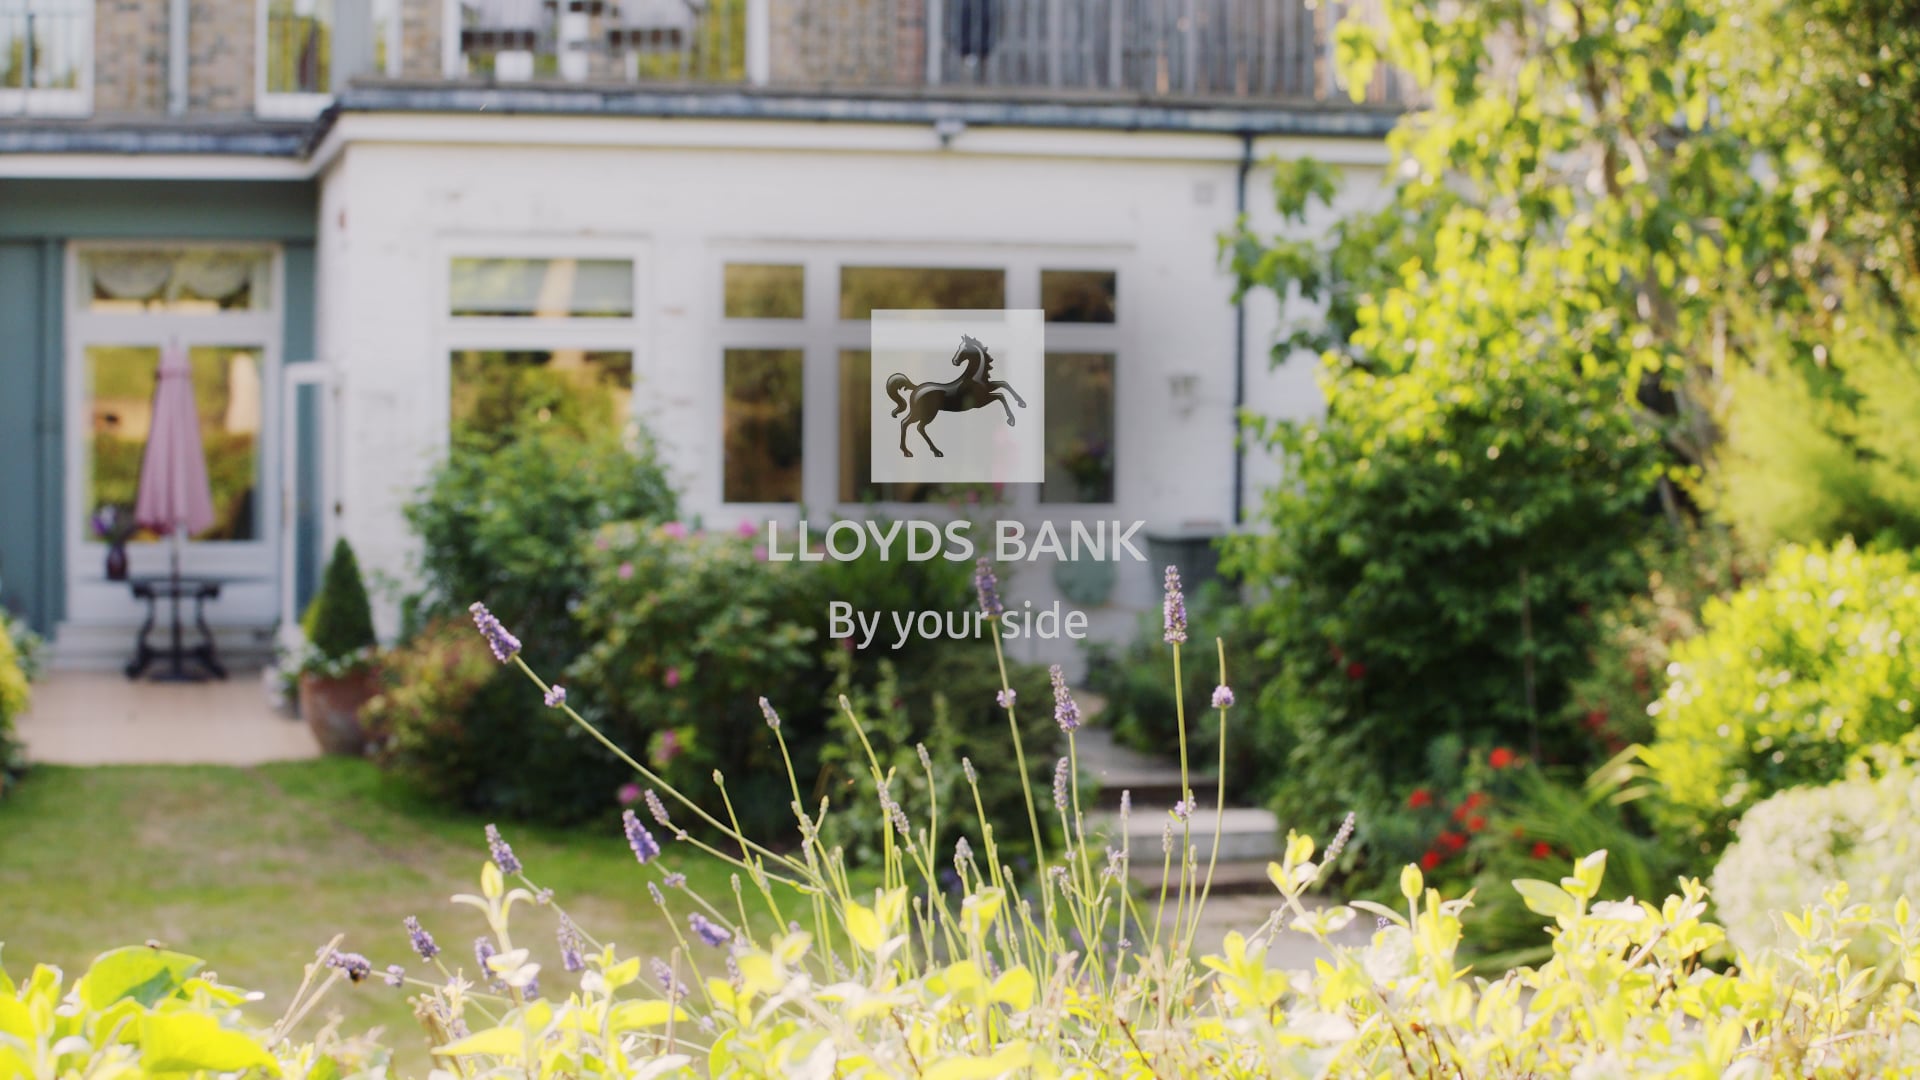 Lloyds Bank Internet Banking TVC commercial 60''